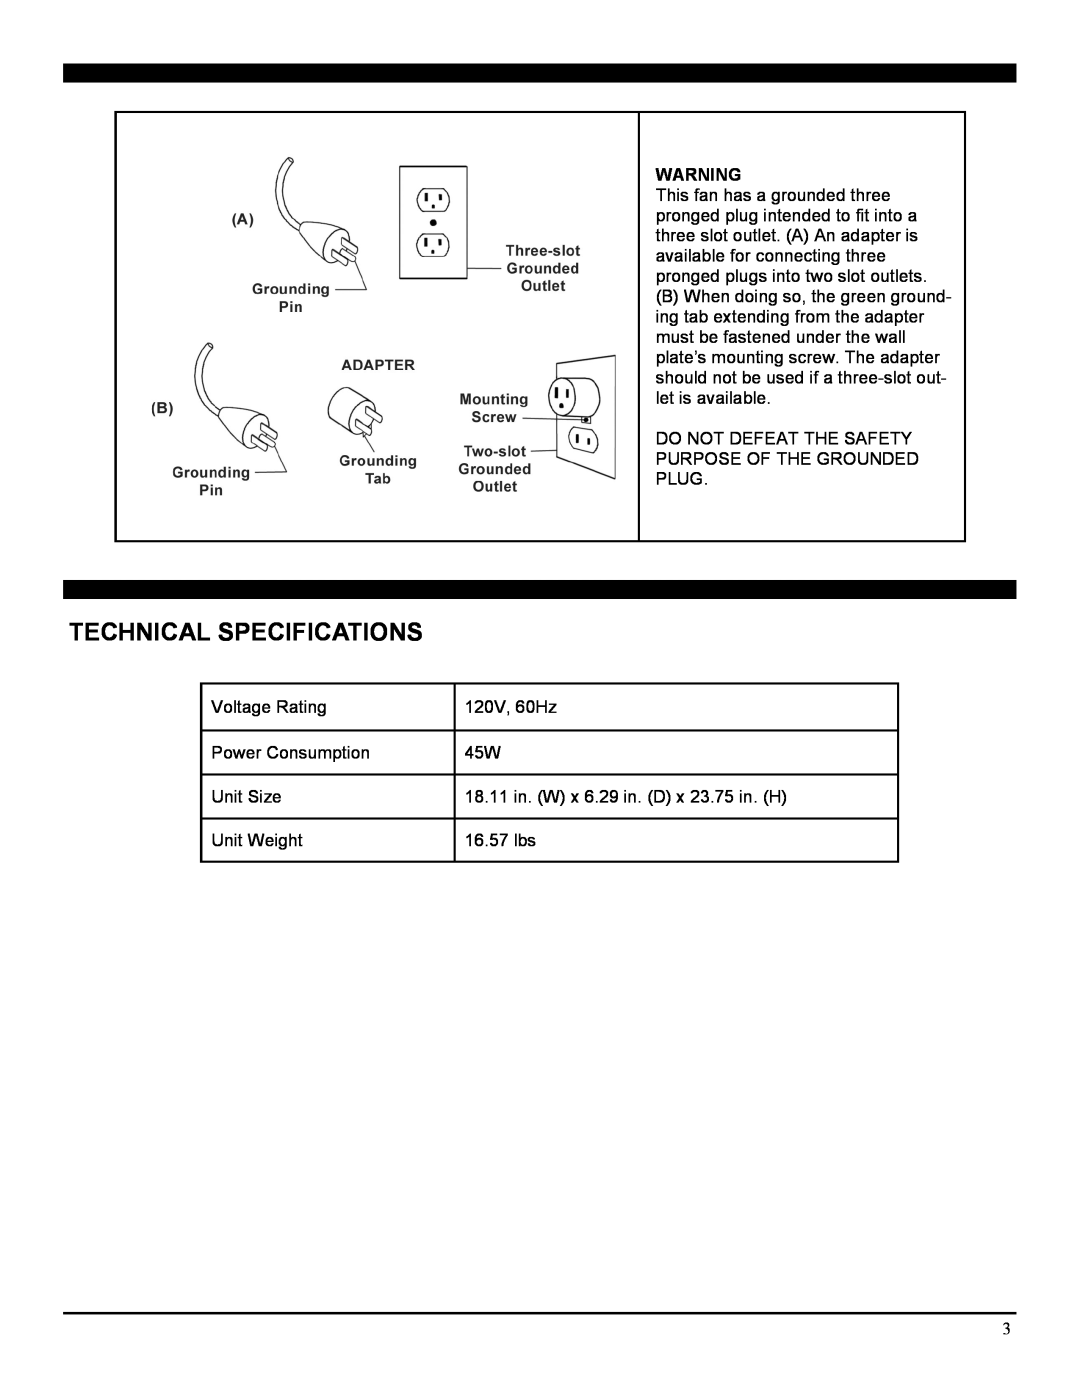 Soleus Air FSM-40 manual Technical Specifications 